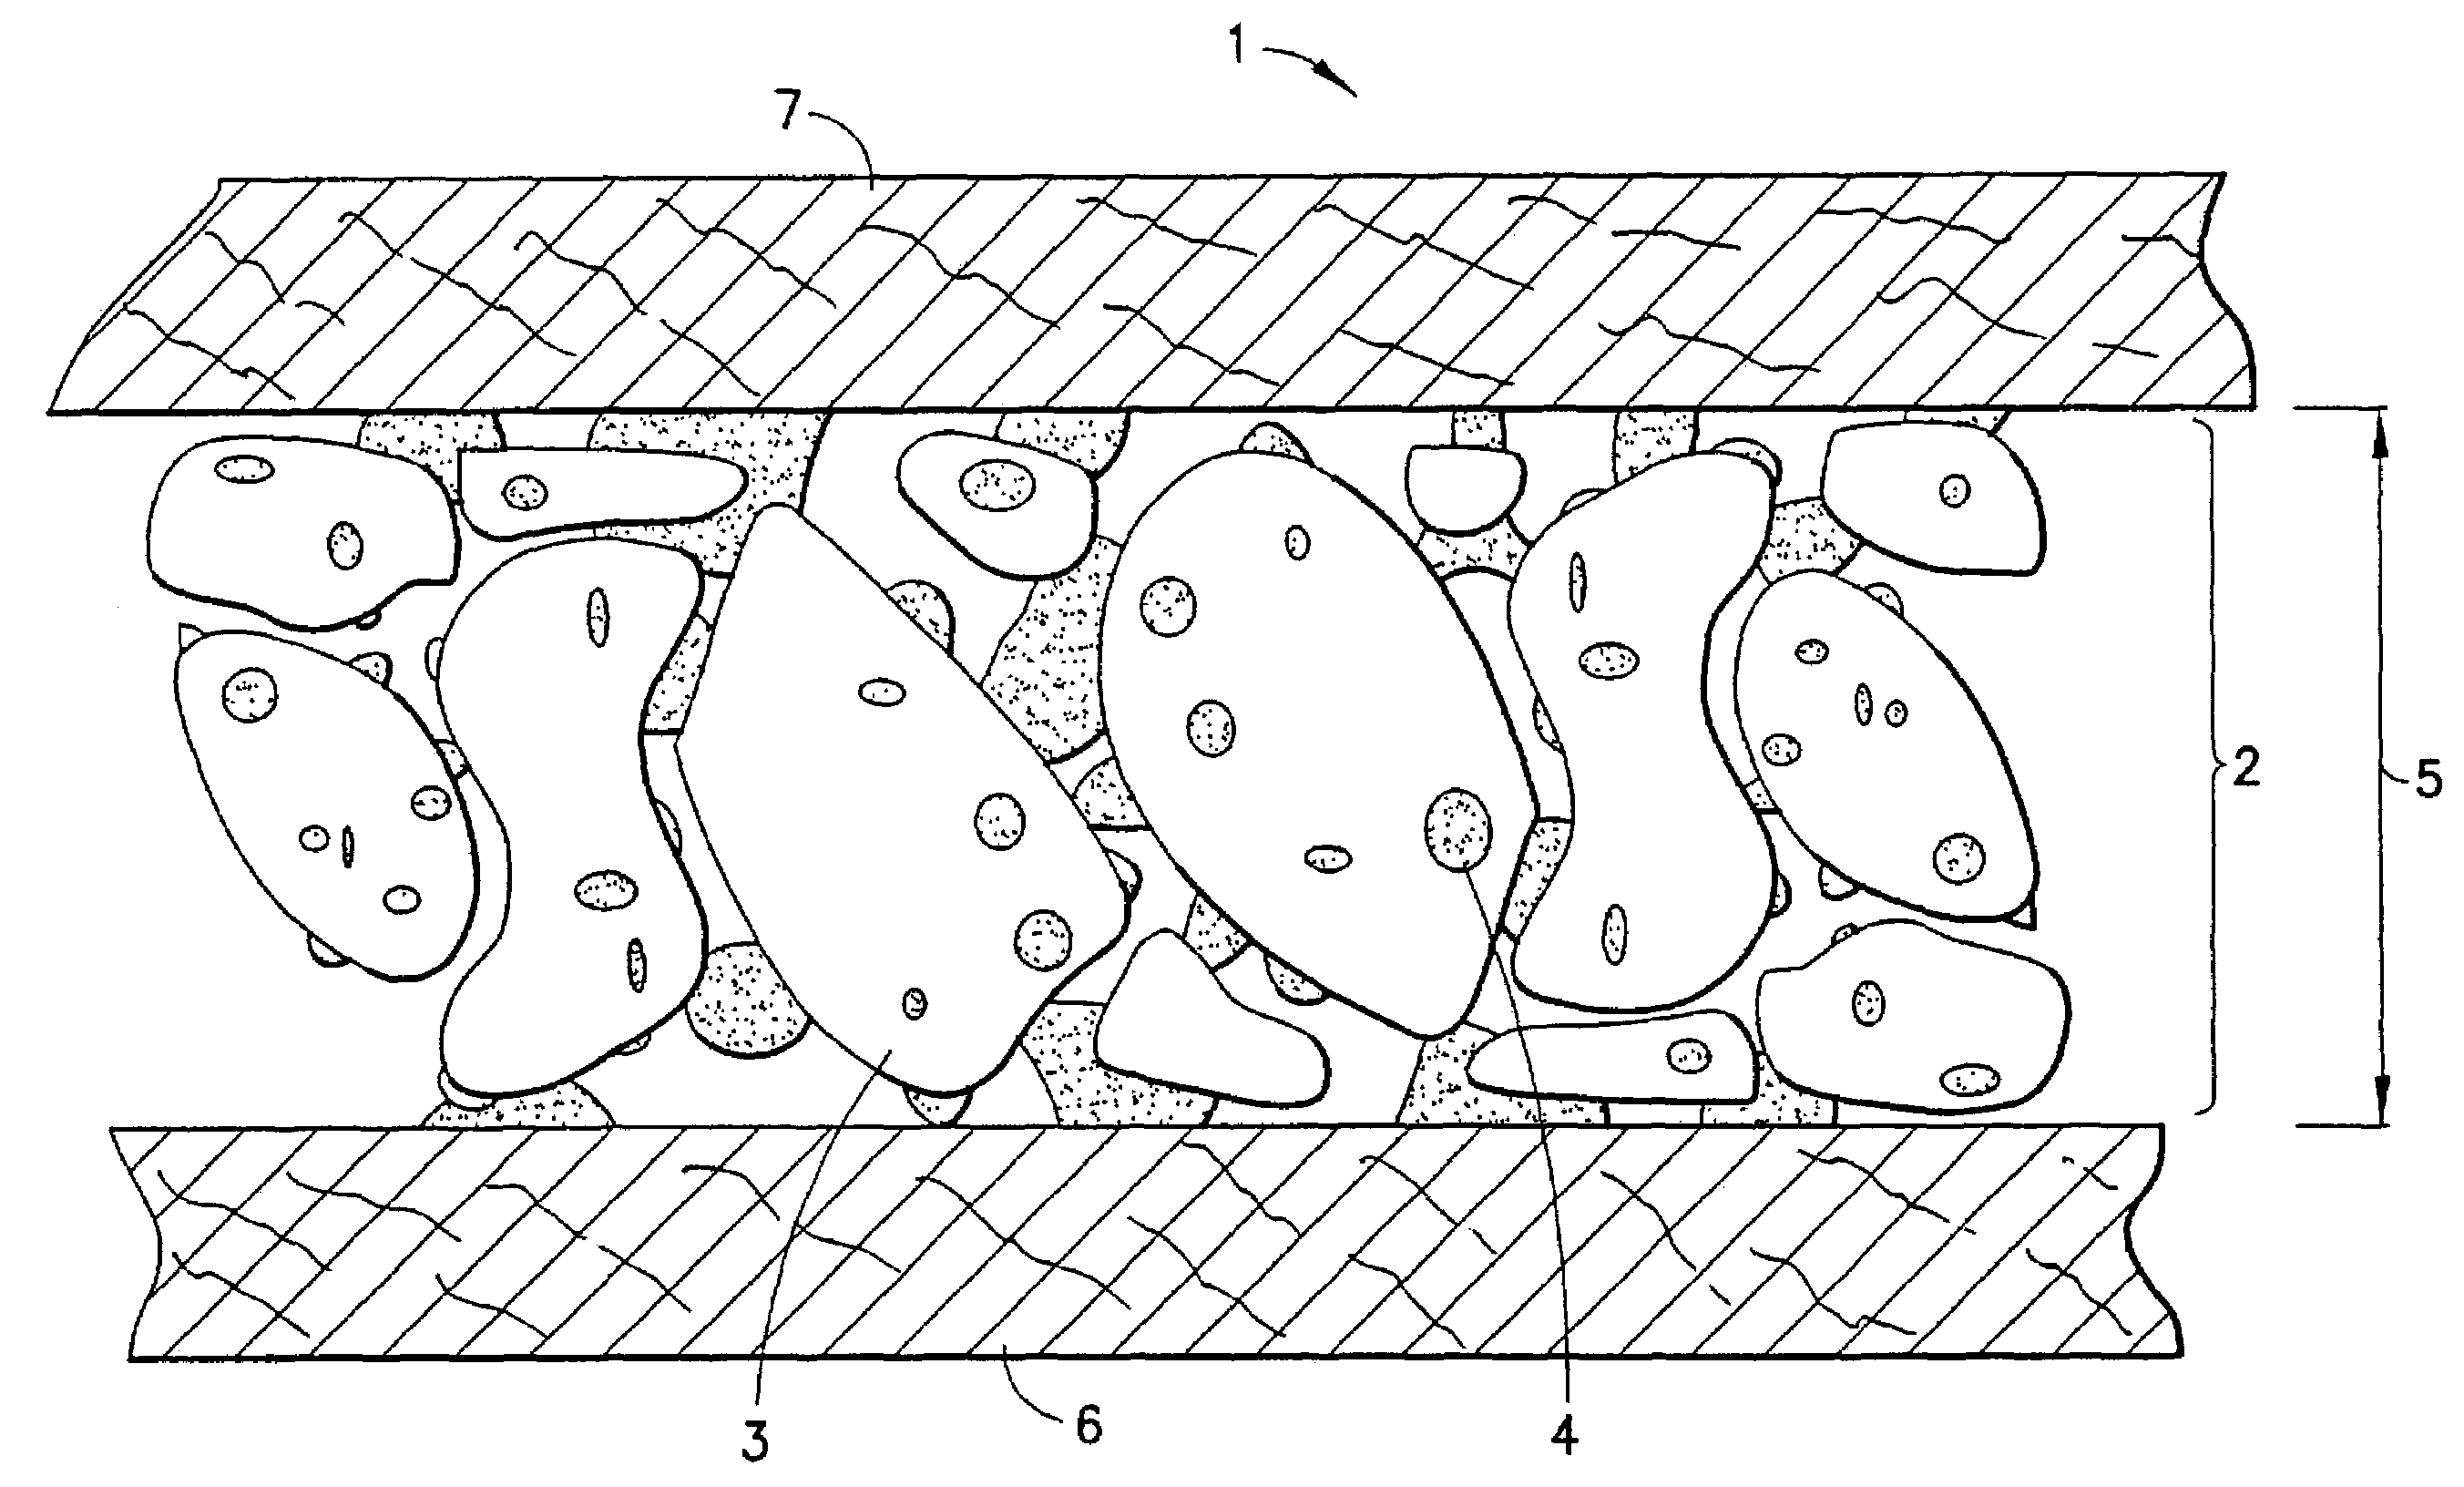 Composite for removing moisture, liquid and odors with anti-microbial capability